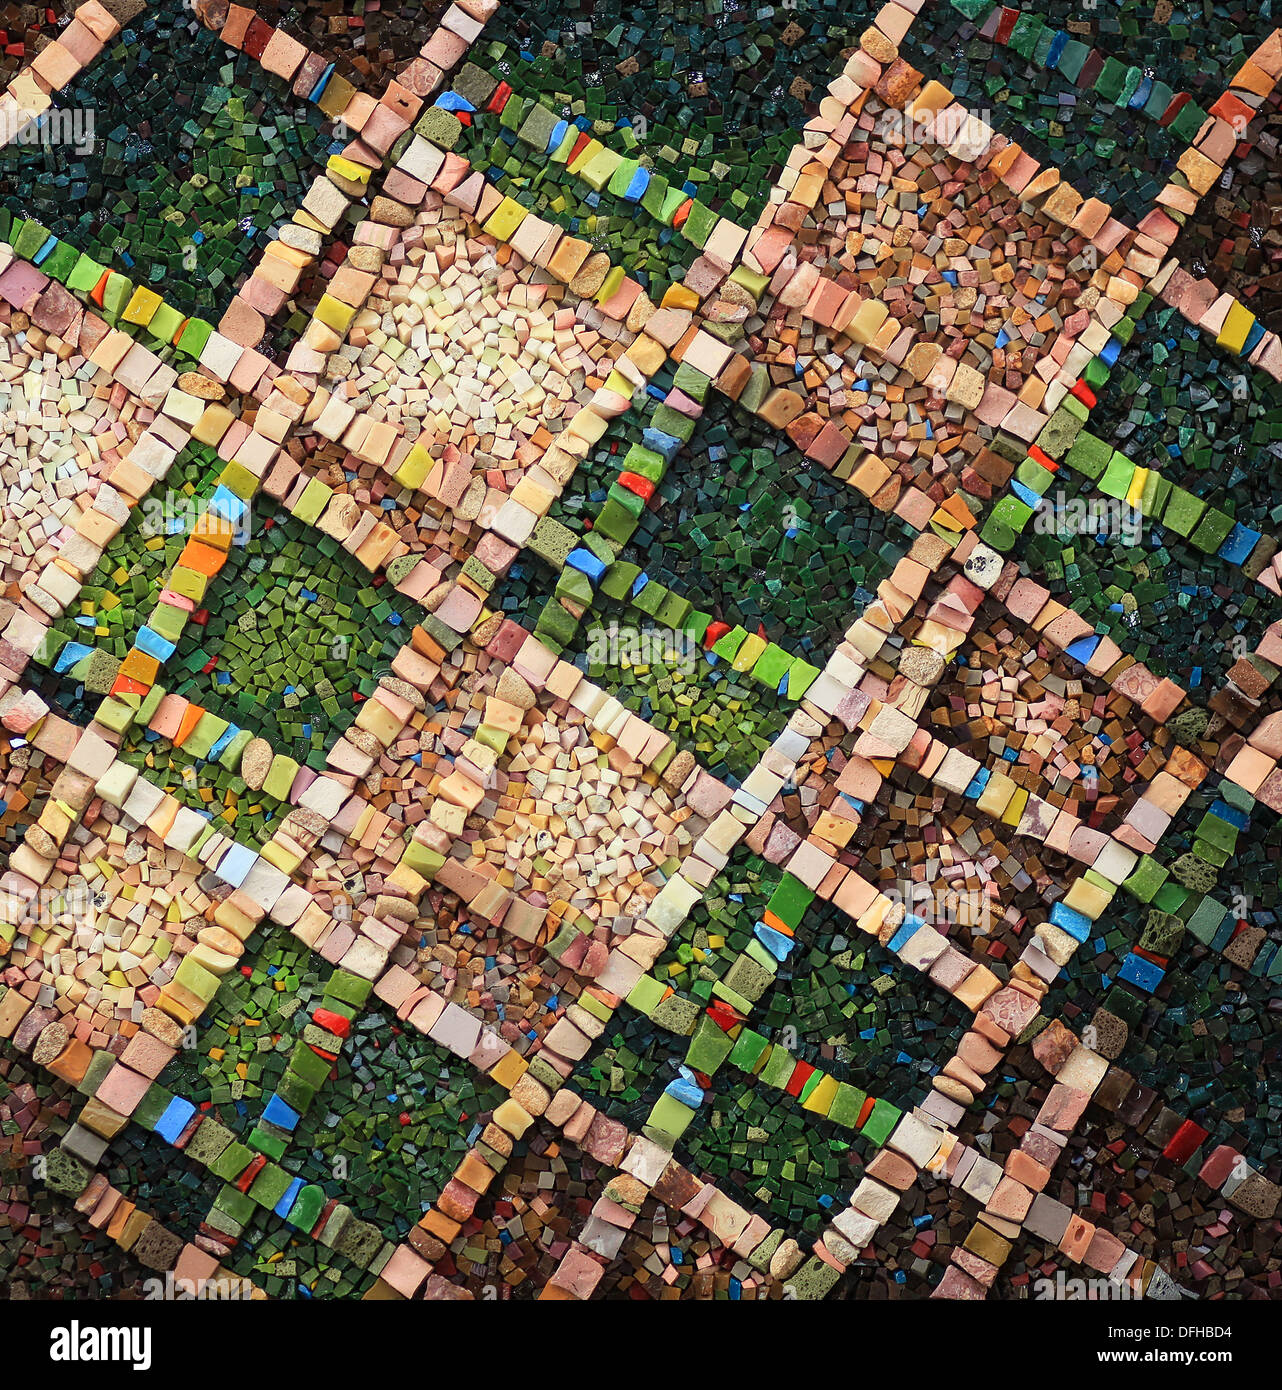 Abstract mosaic with green and beige chequered pattern. Contemporary artwork realized by the Scuola mosaicisti del Friuli. Spilimbergo, Italy, Europe. Stock Photo